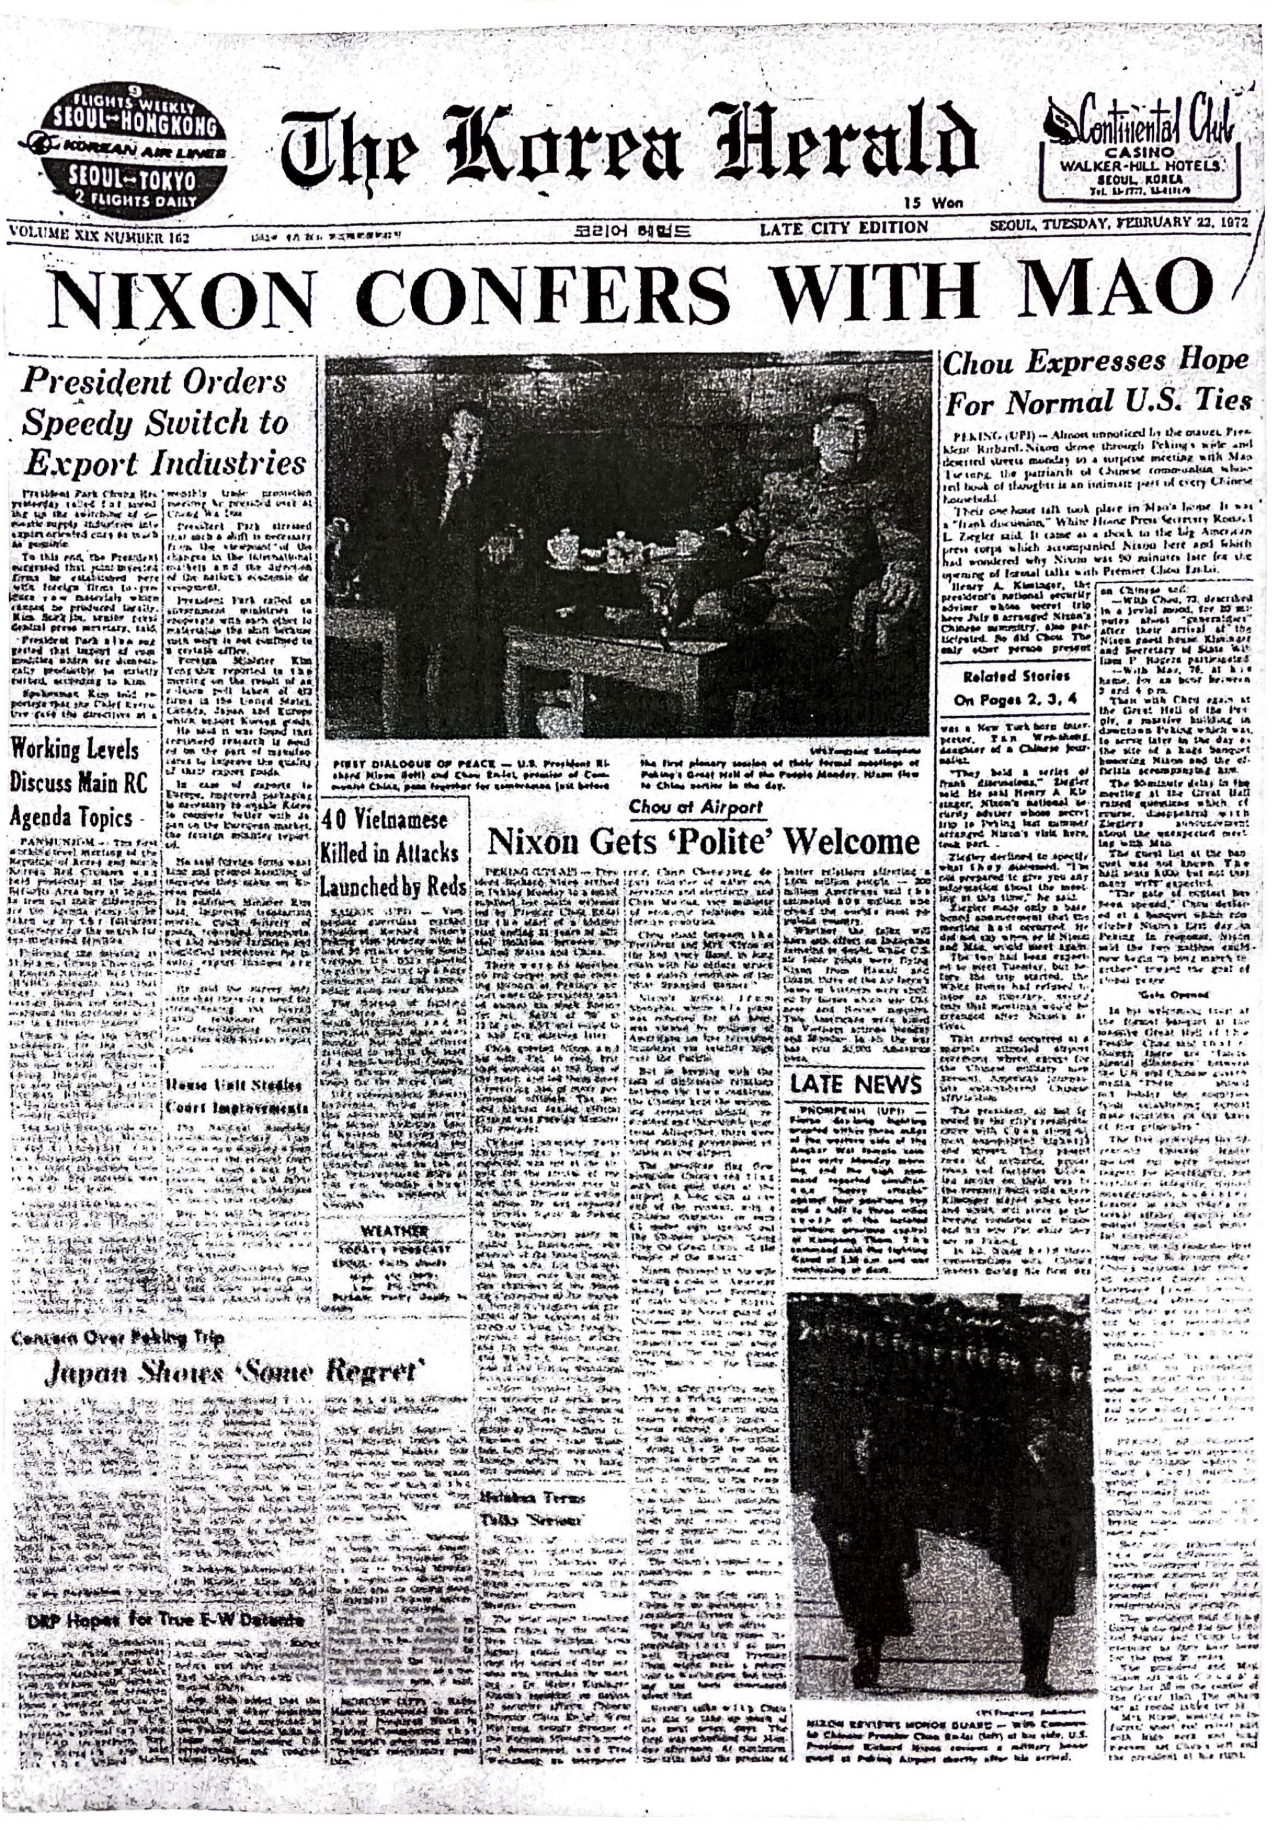 A copy of The Korea Herald’s front page on Feb. 22, 1972, on the US-China detente. South Korean Foreign Minister Park Jin described the report as what led him to pursue diplomacy as his career. (Korea Herald file photo via National Library)